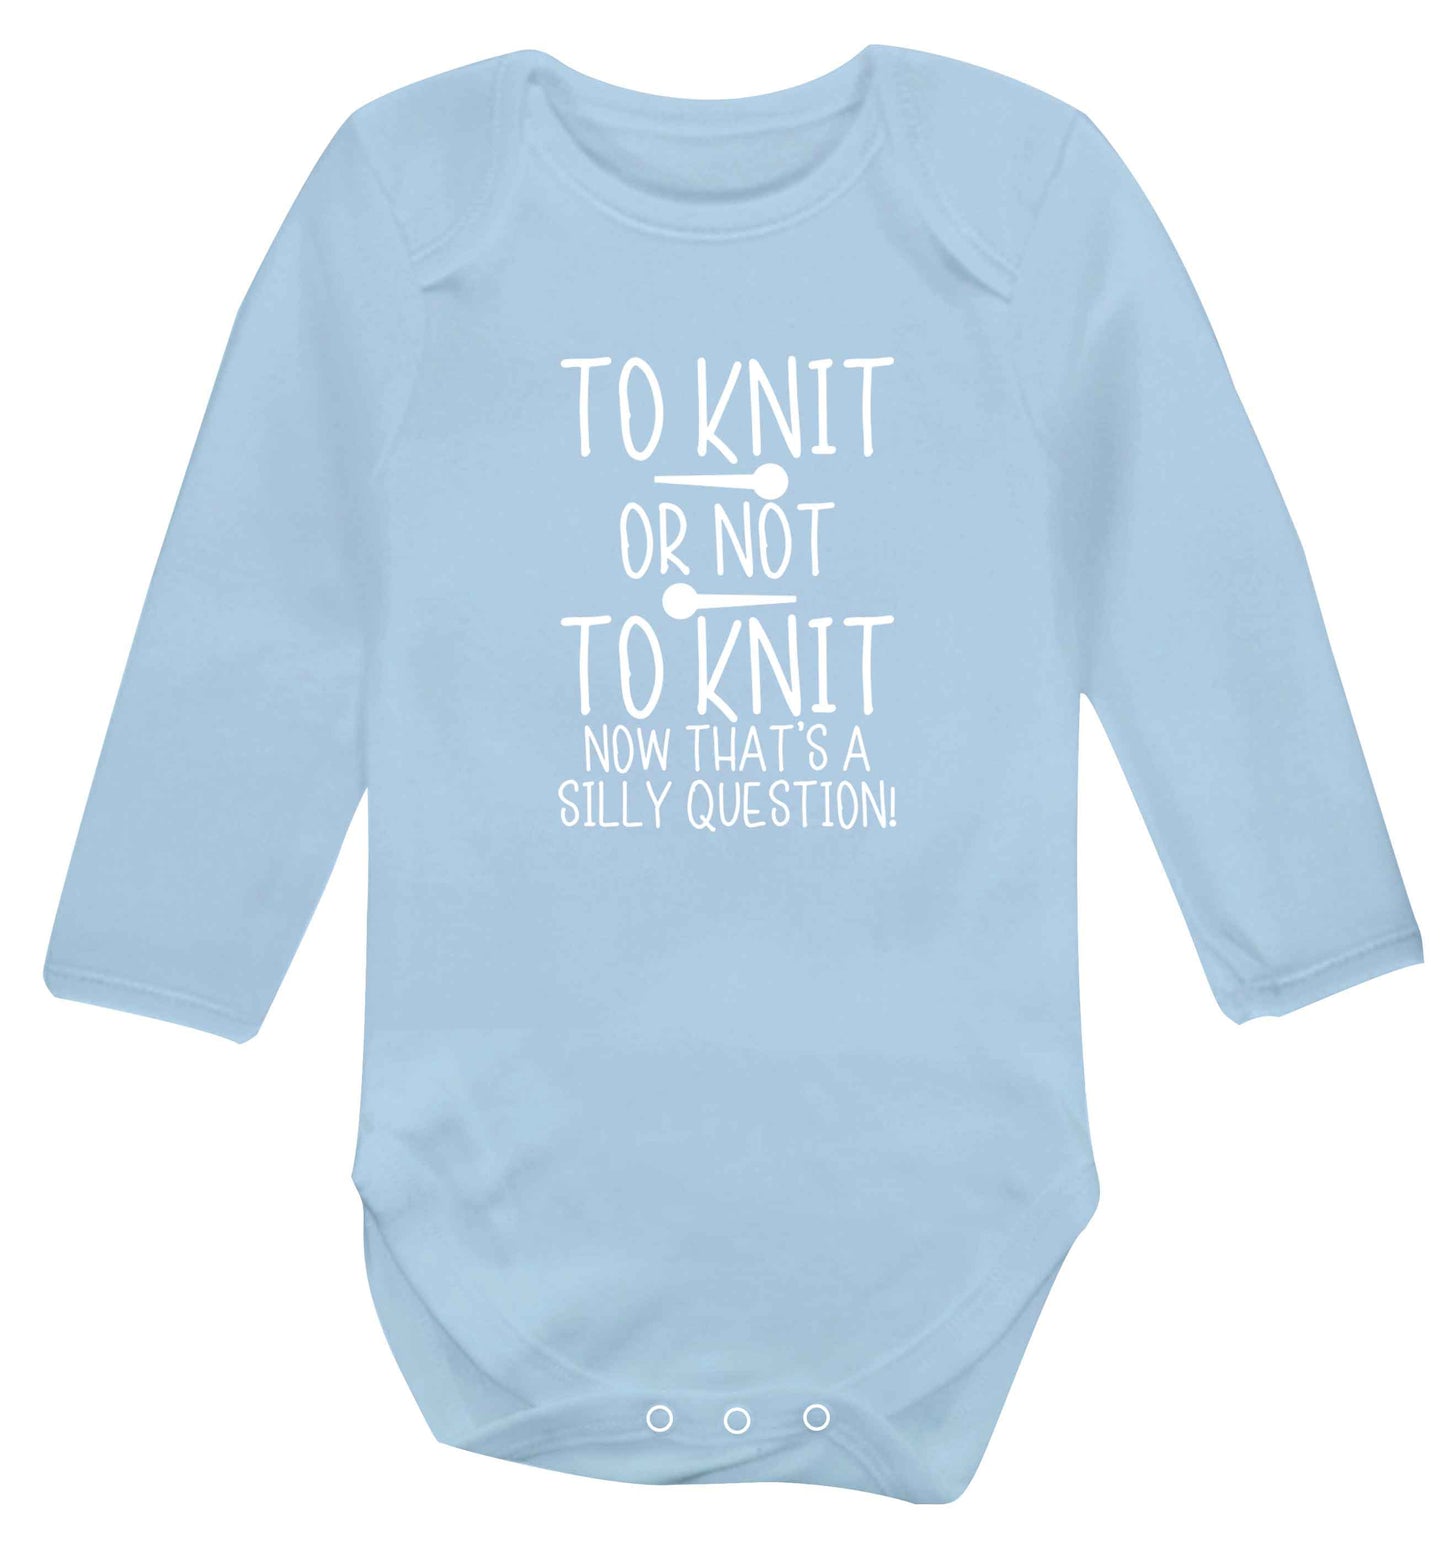 To knit or not to knit now that's a silly question baby vest long sleeved pale blue 6-12 months